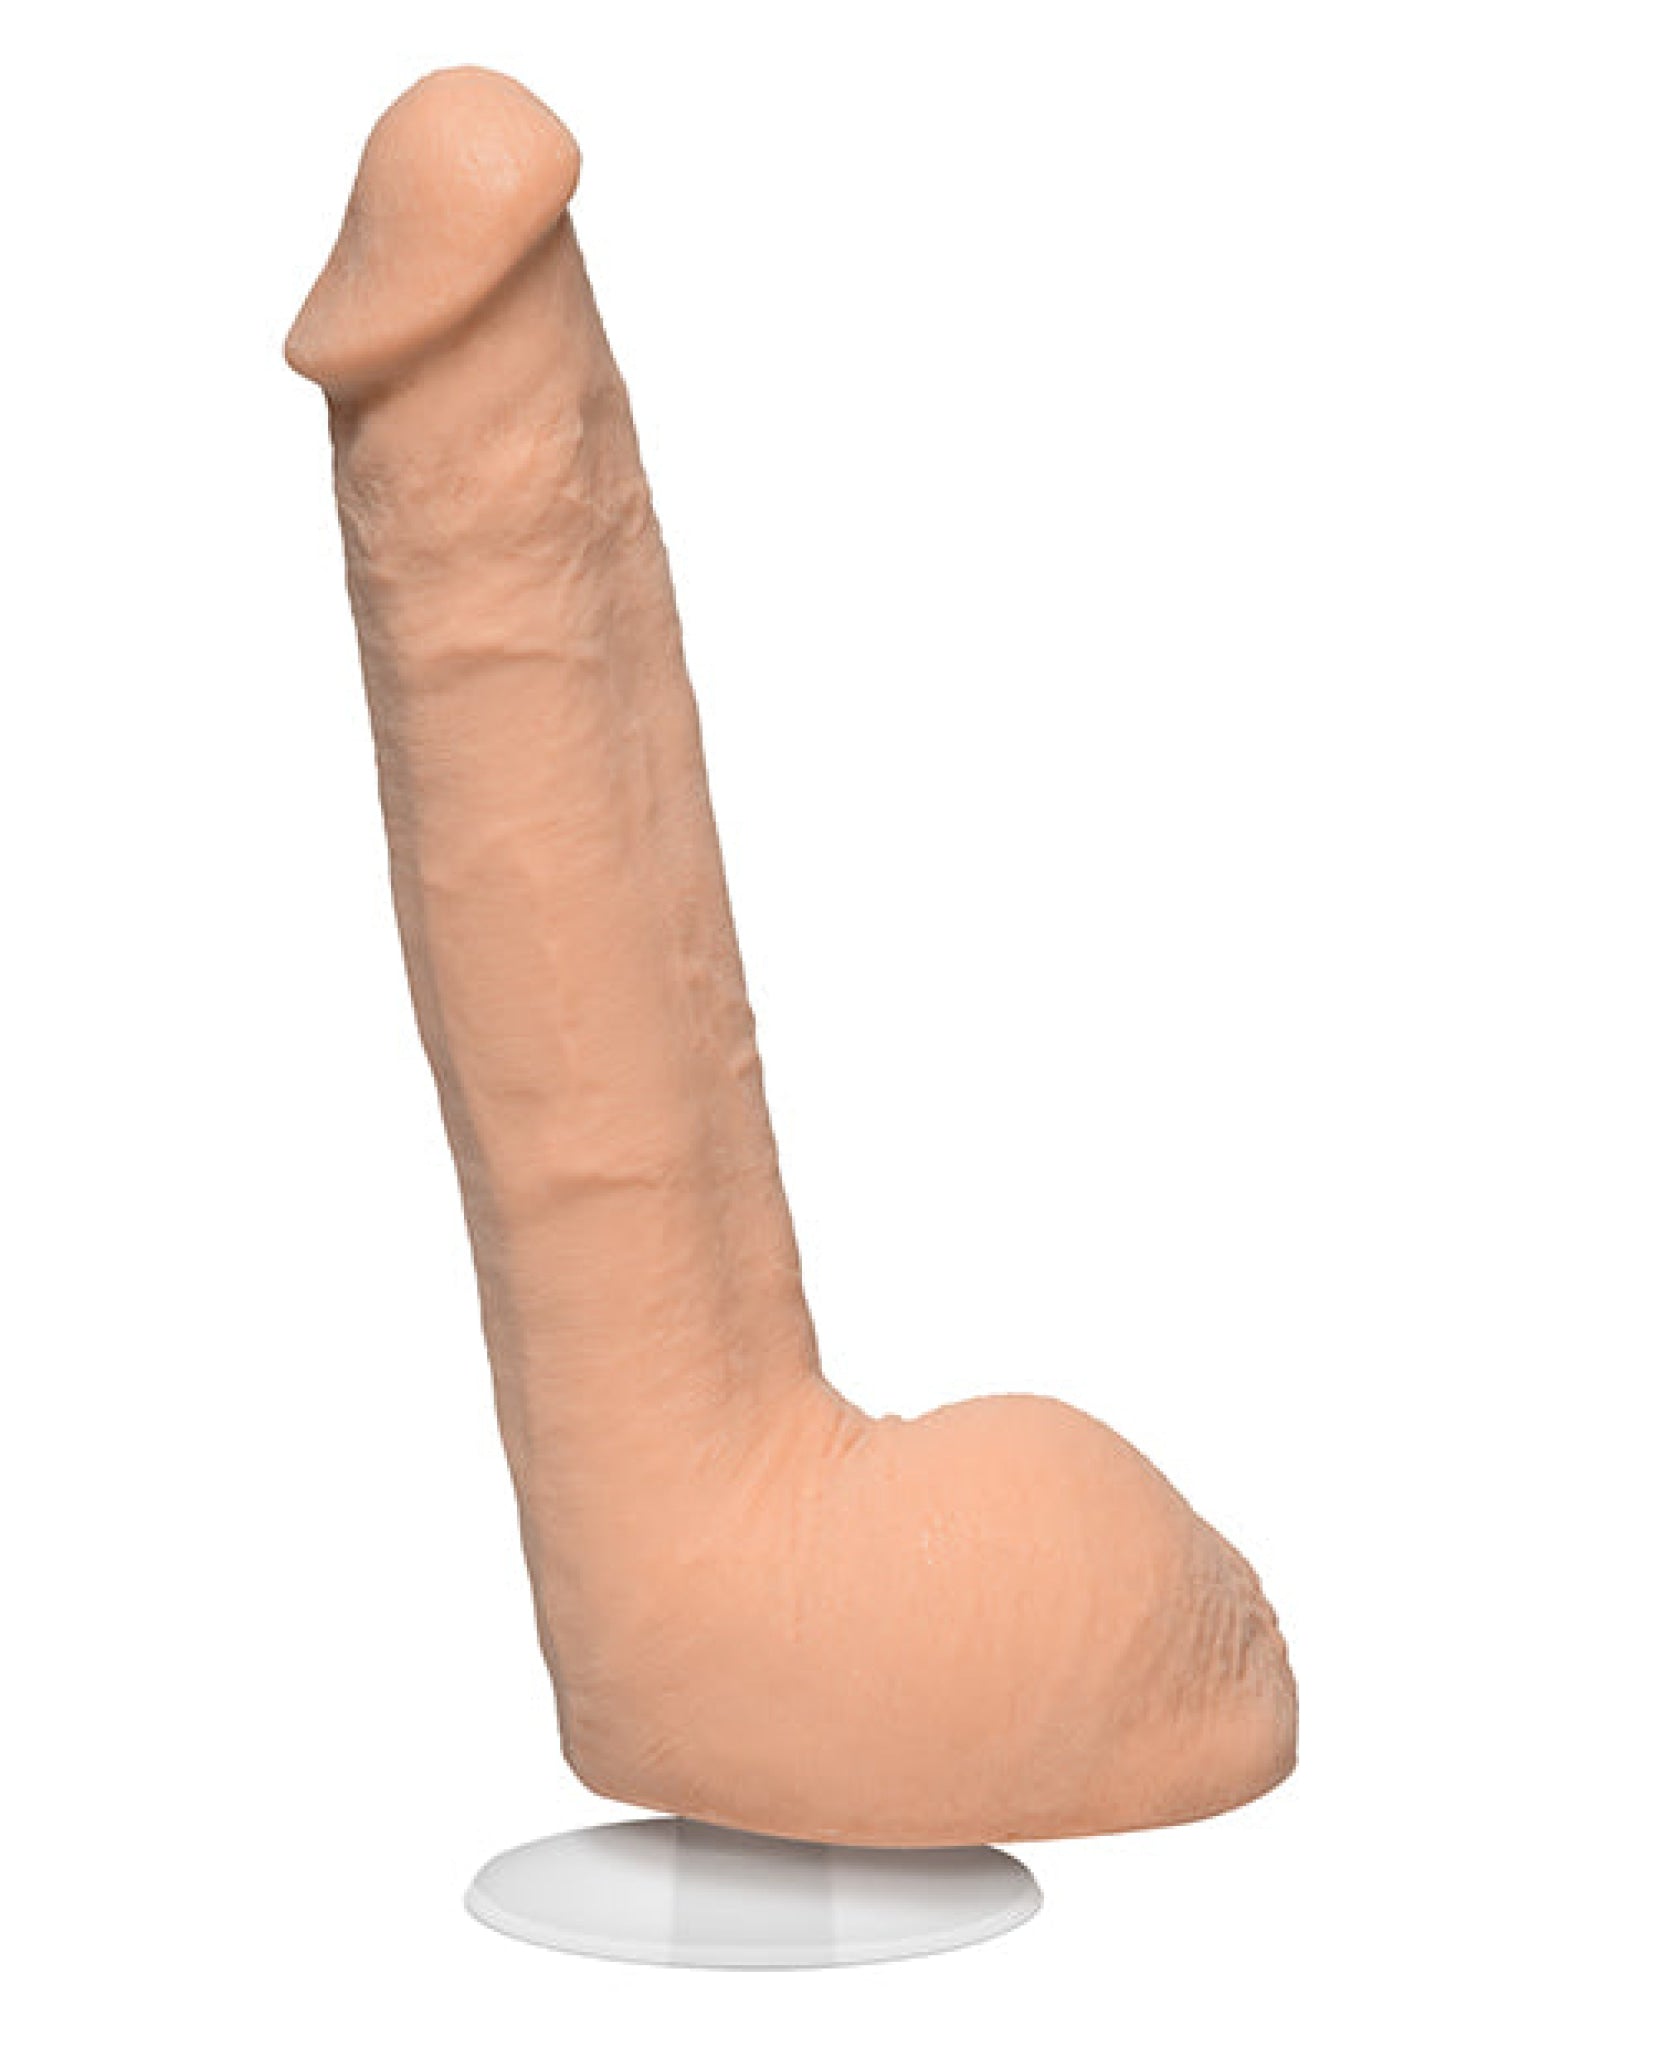 Signature Cocks Ultraskyn 9" Cock W-removable Vac-u-lock Suction Cup - Small Hands Doc Johnson